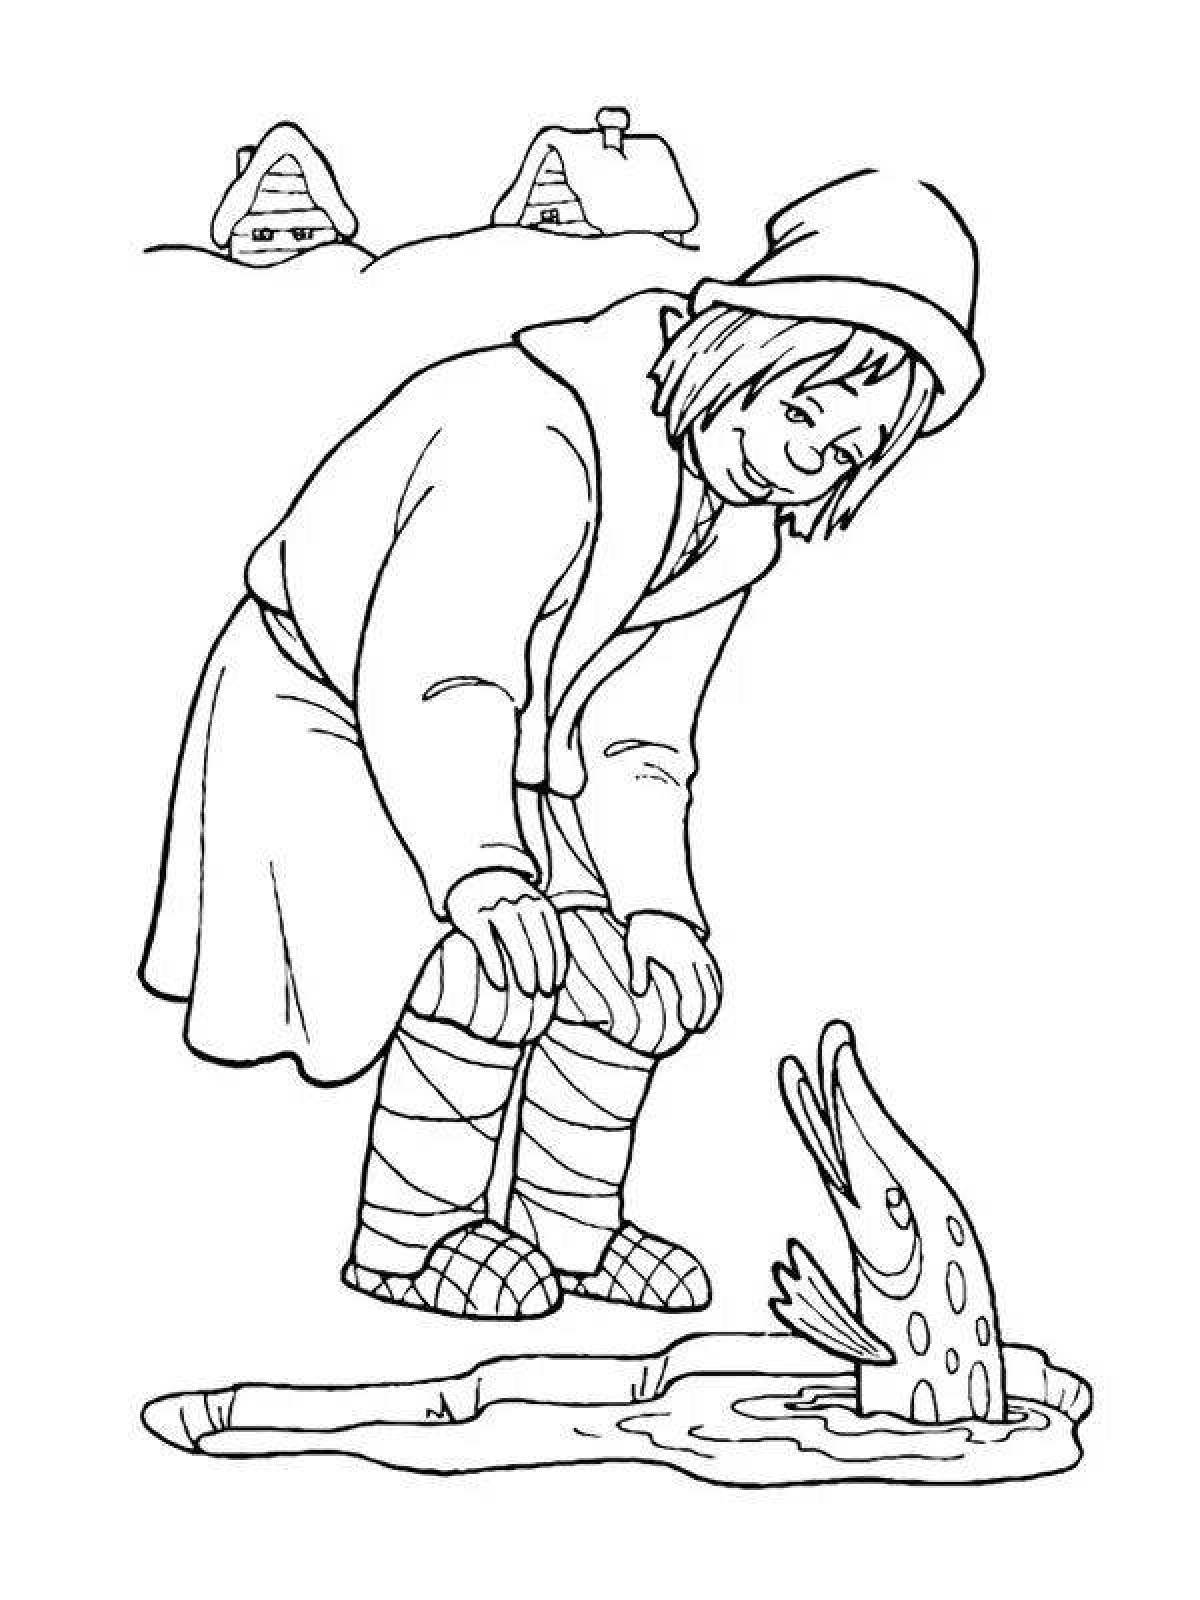 Colorful pike and emela coloring page